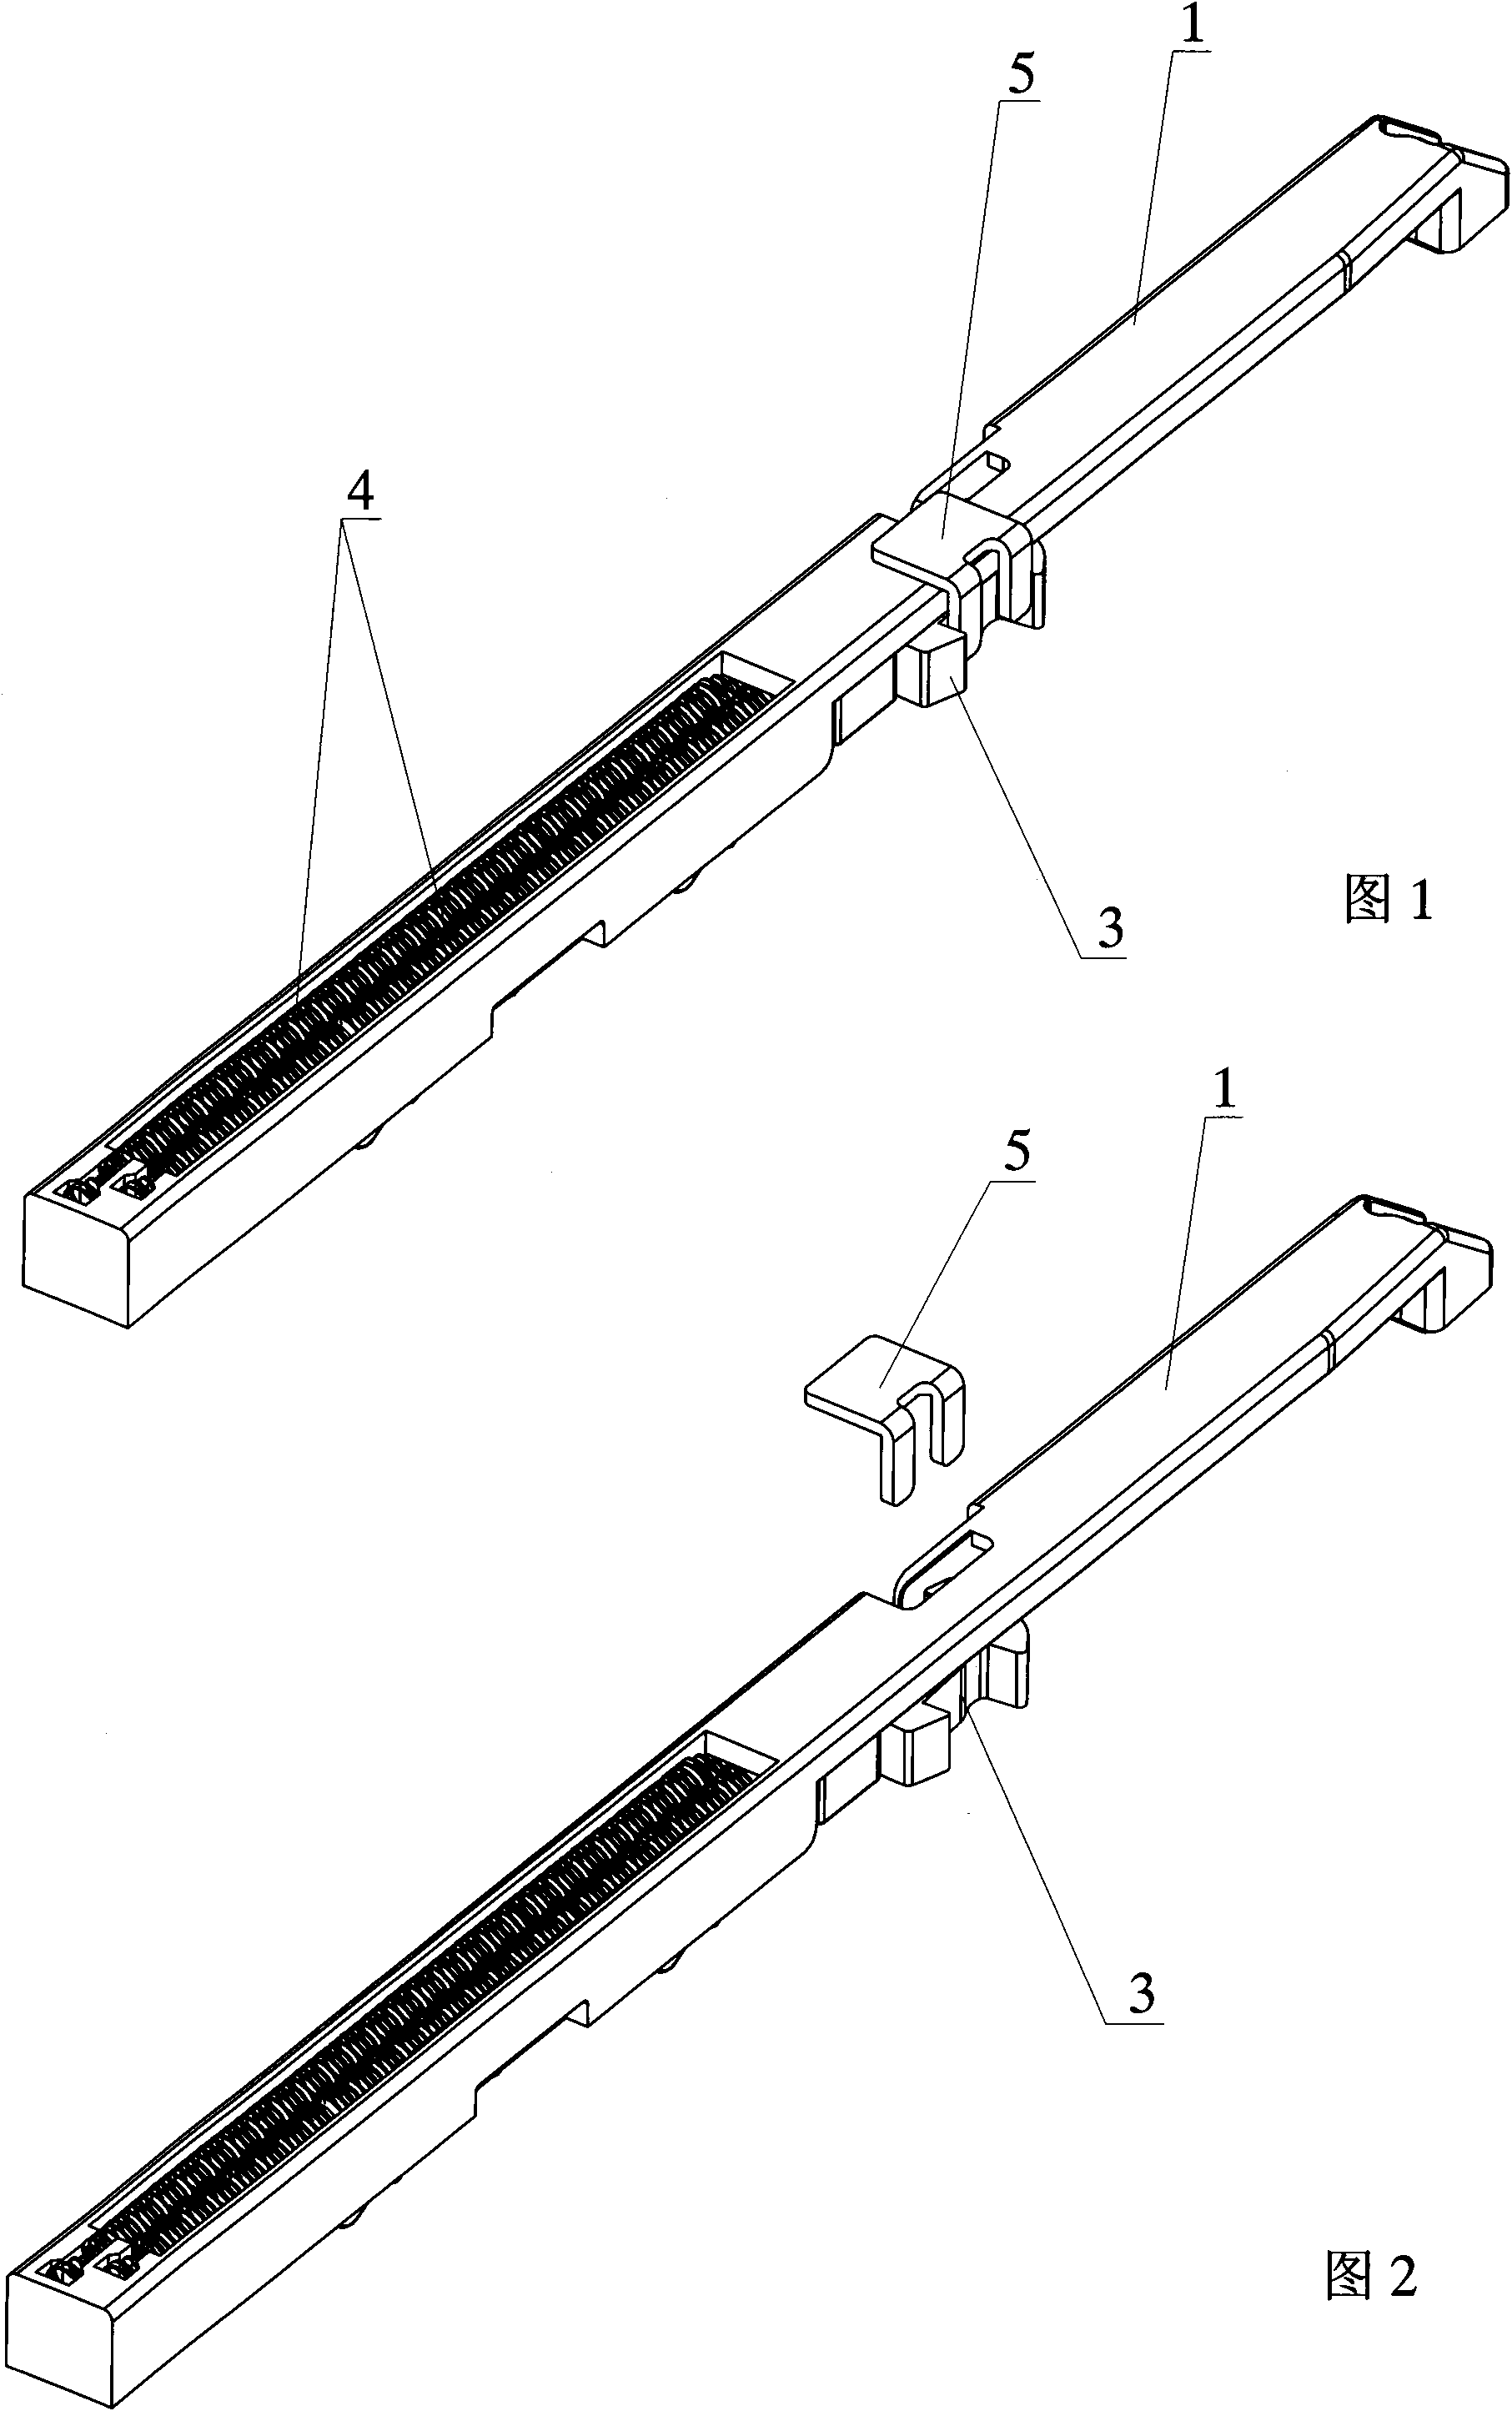 Guide rail return traction device